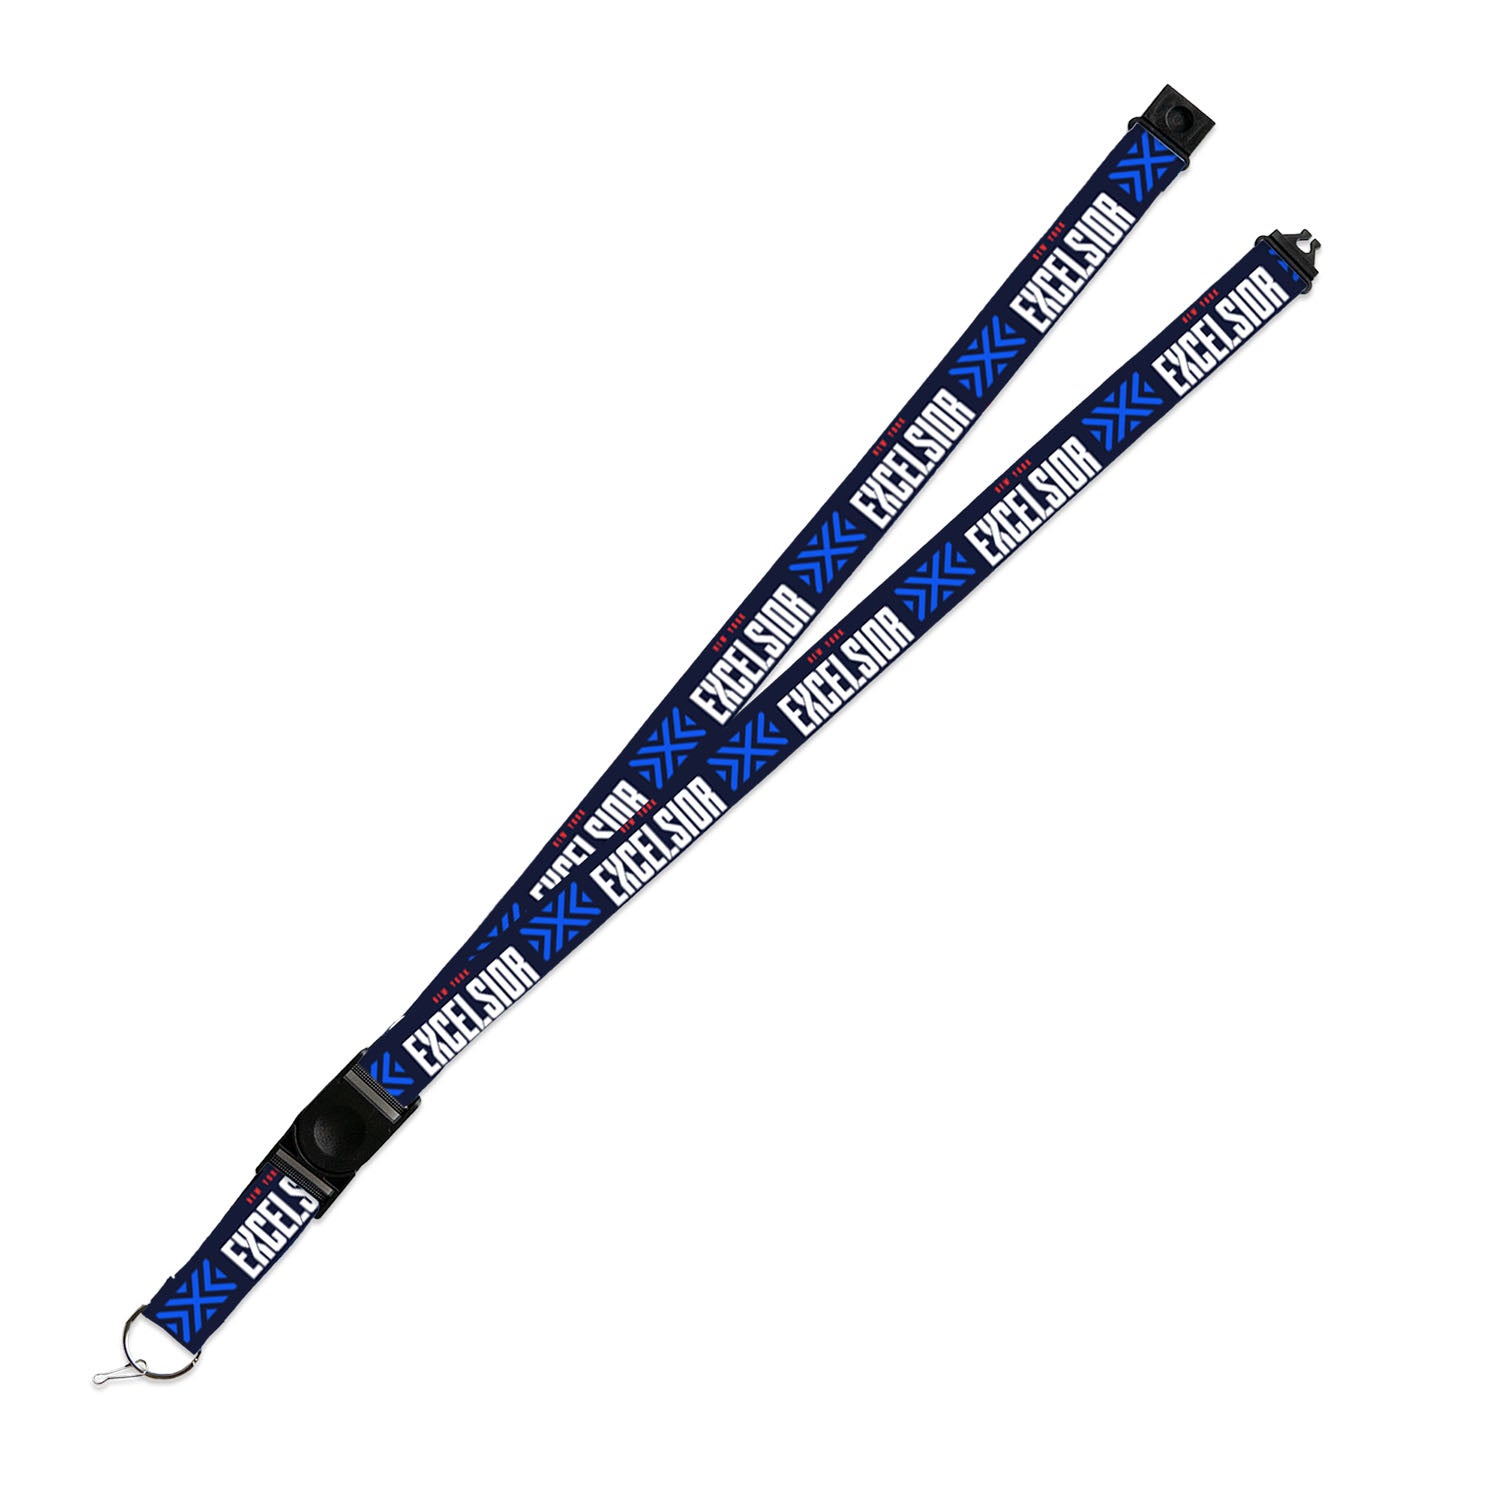 New York Excelsior Lanyard in Blue - Front View